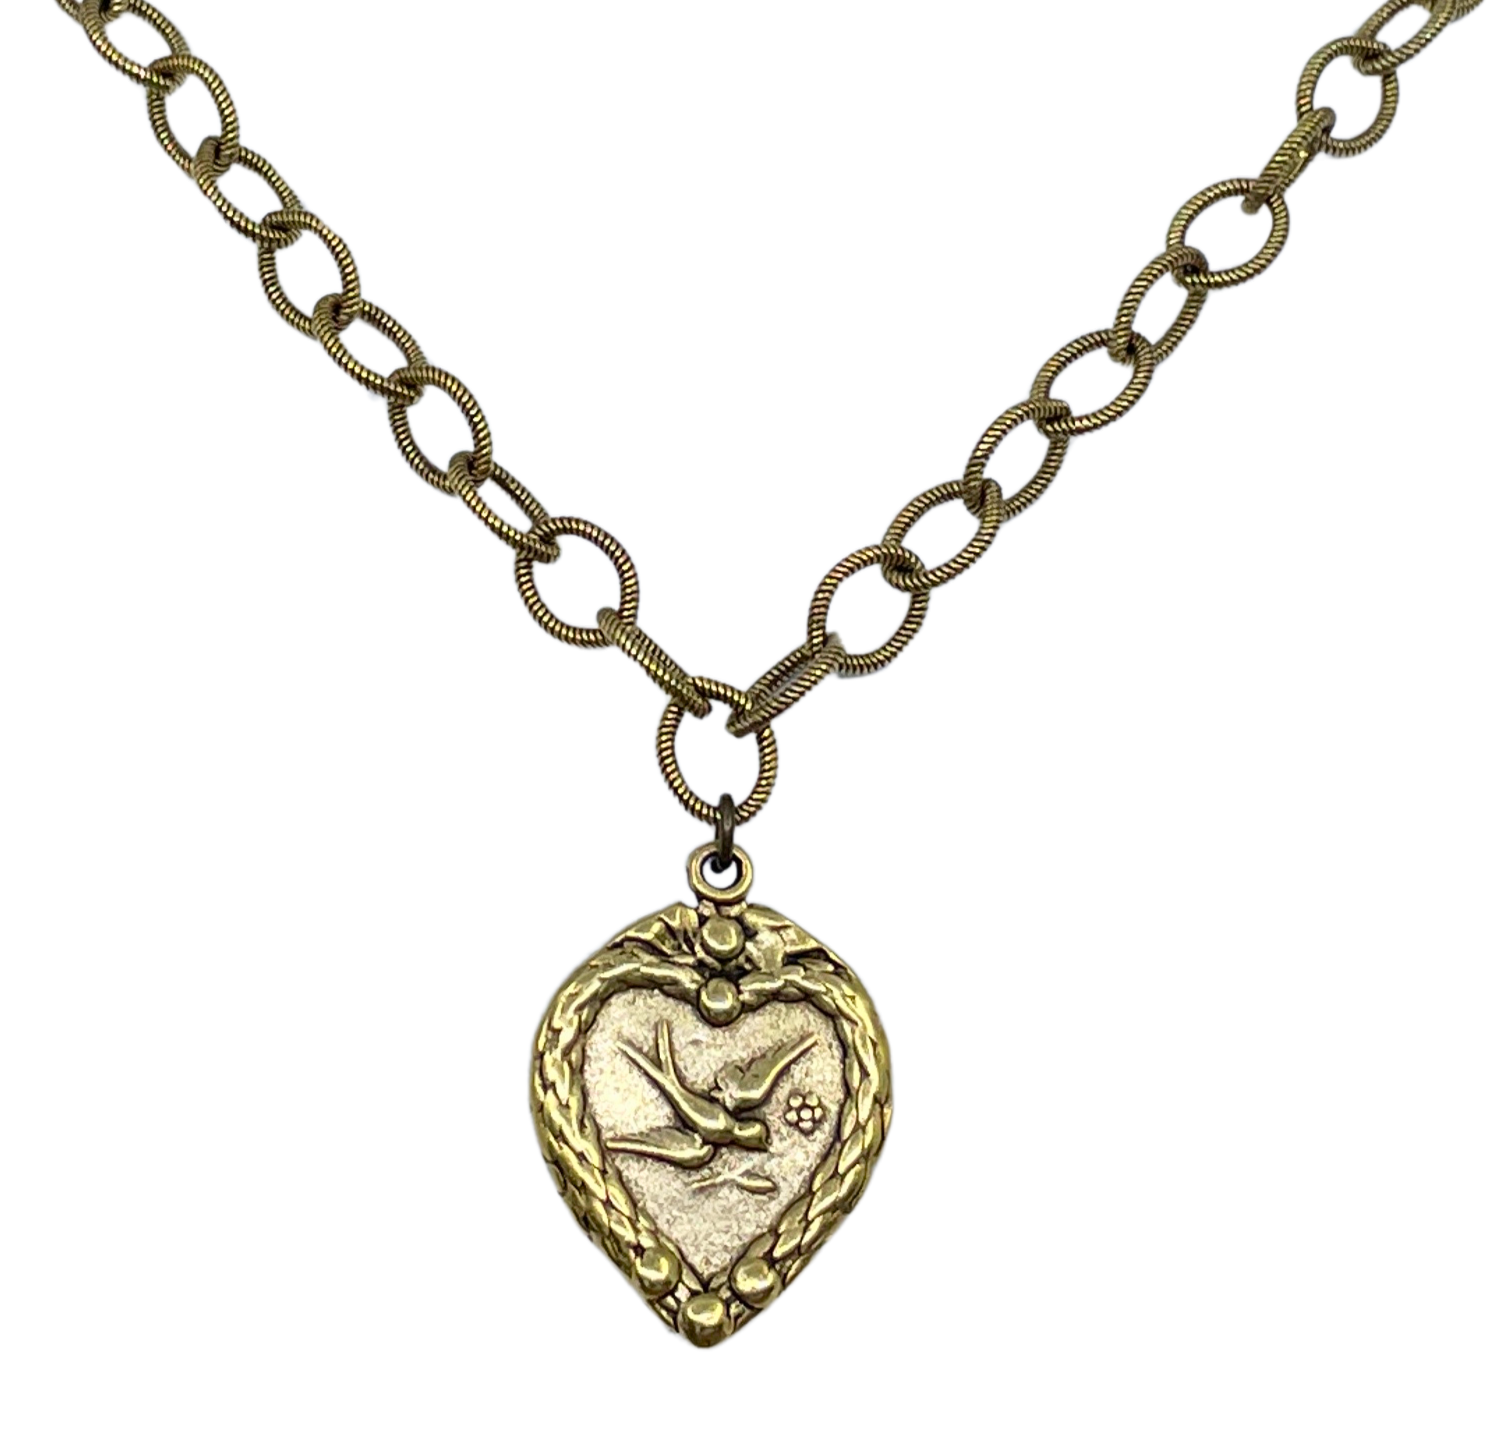 Vintage Reproduction Gold Plated Chain with Dove Heart